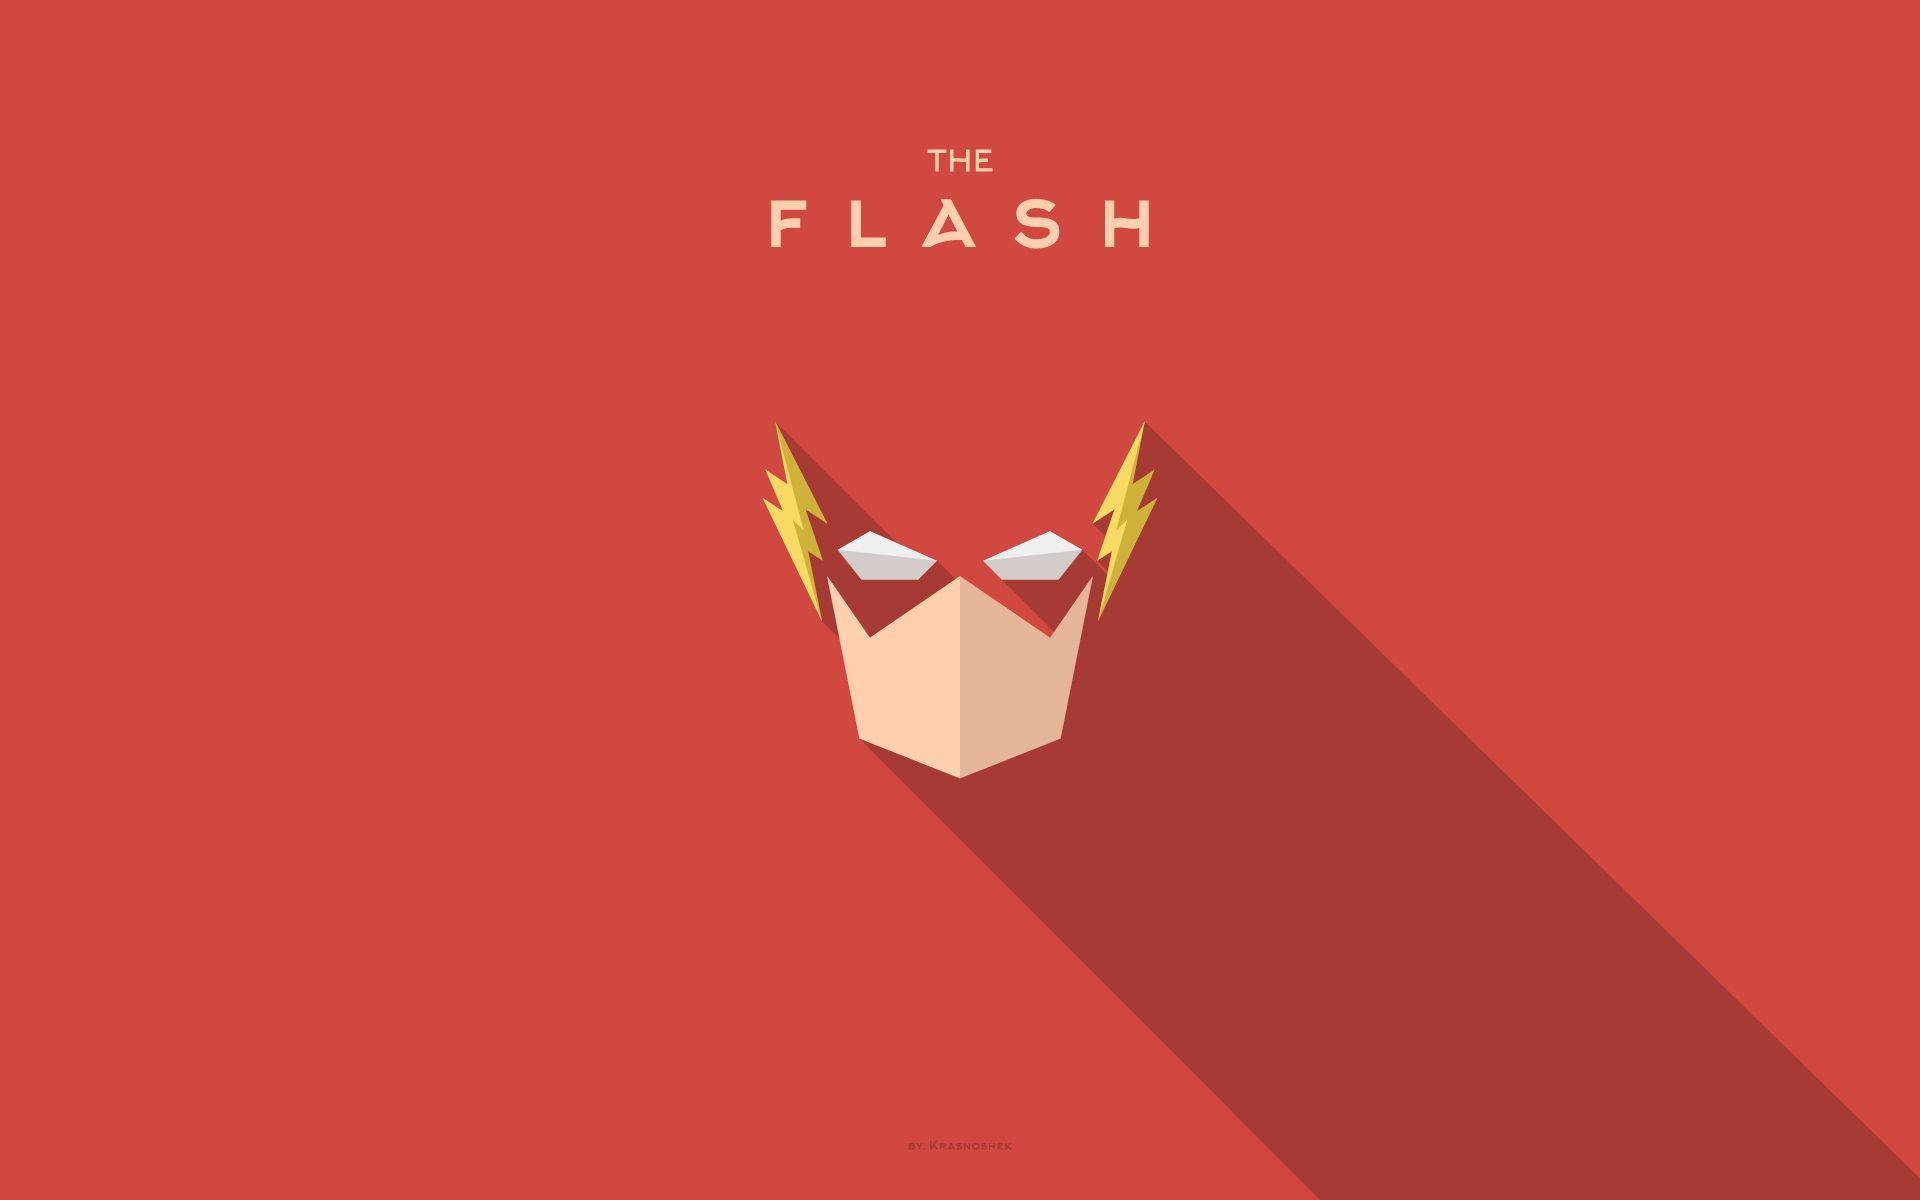 The Flash Wallpaper Fantastic The Flash Images HD